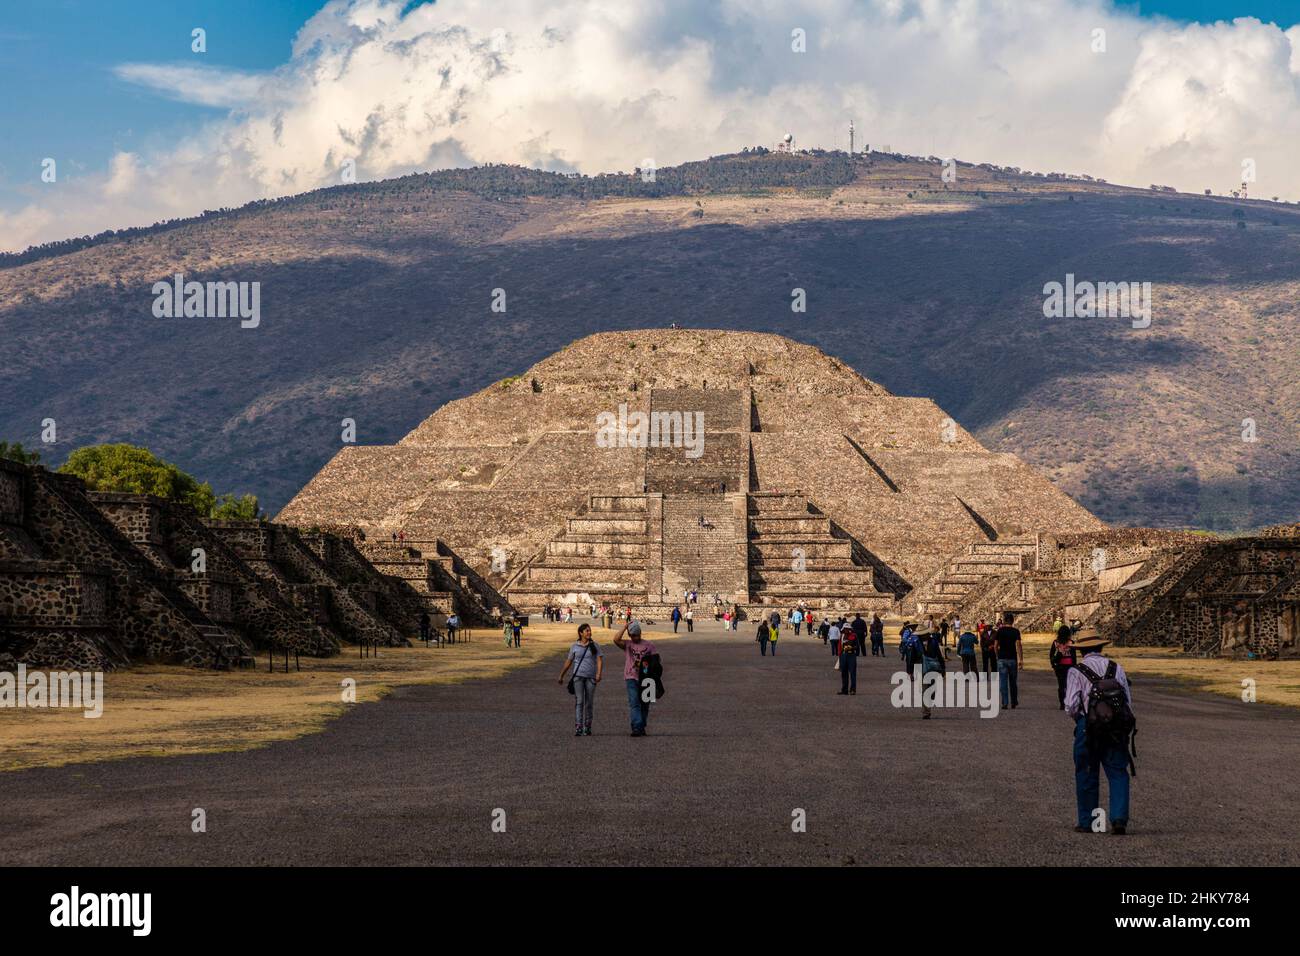 Pyramid of the Moon, Teotihuacan archaeological site, Unesco World Heritage Site, Mexico City. North America Stock Photo